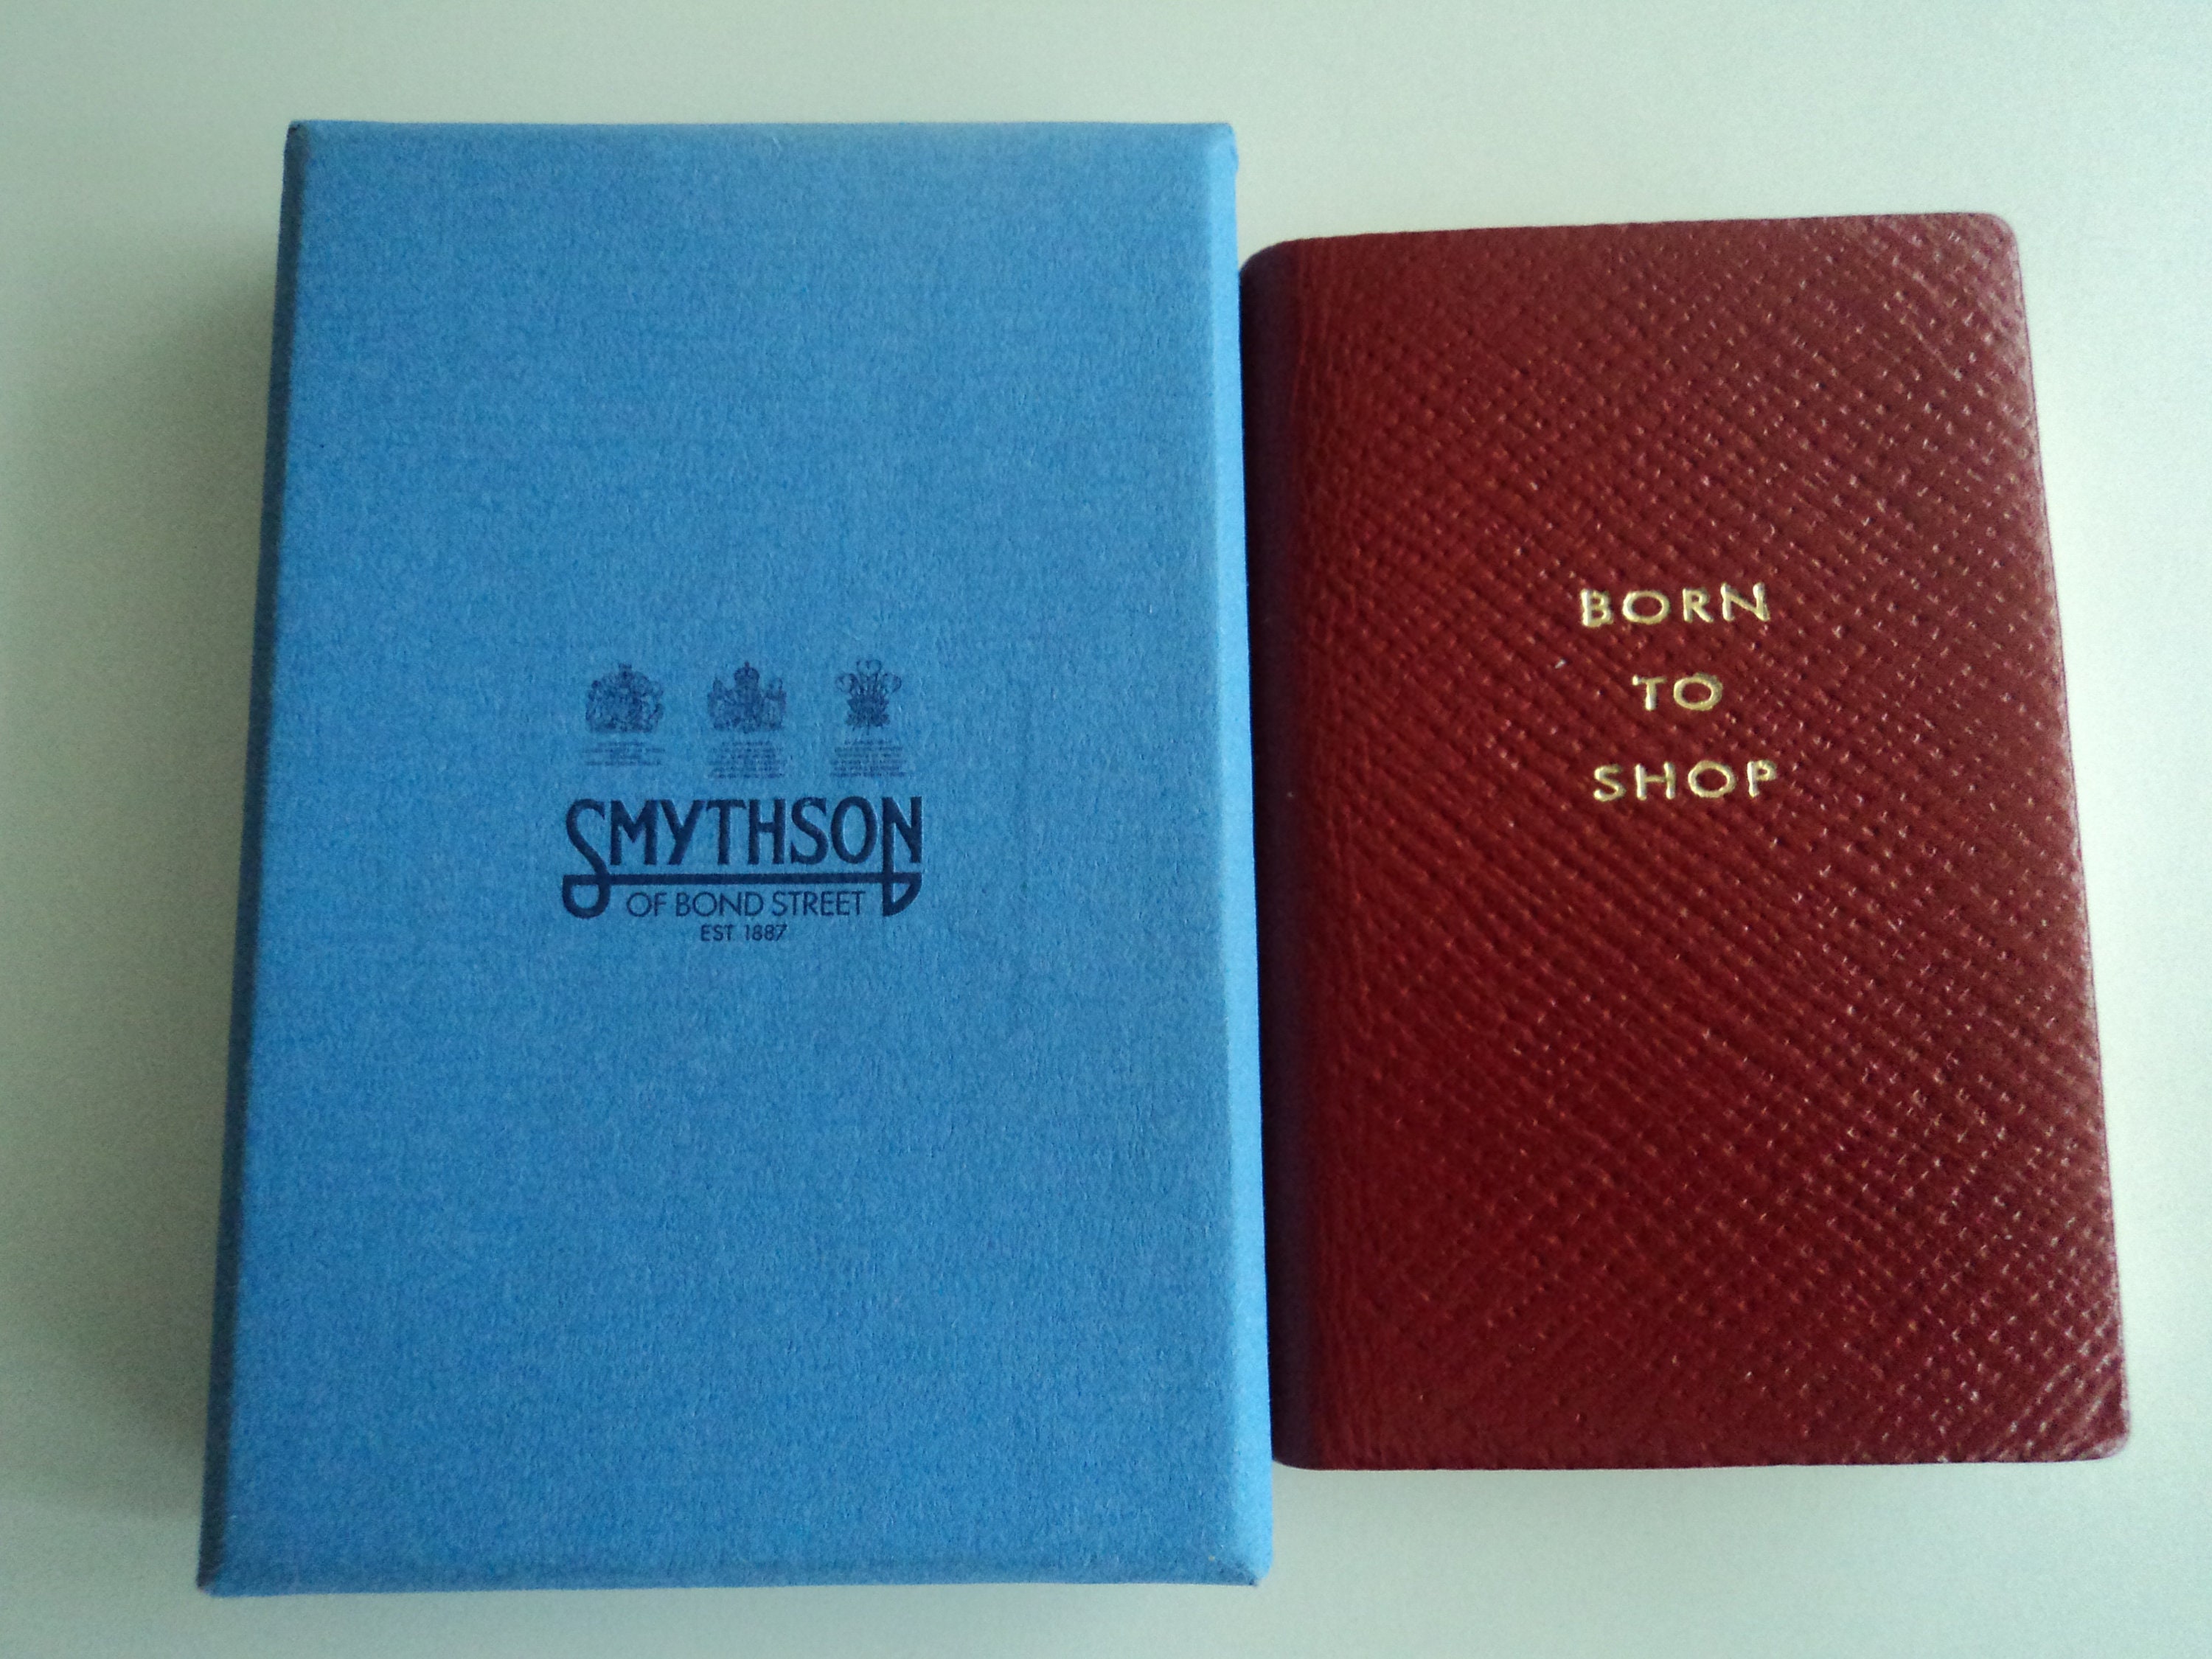 We are thrilled to begin carrying Smythson of Bond Street leather